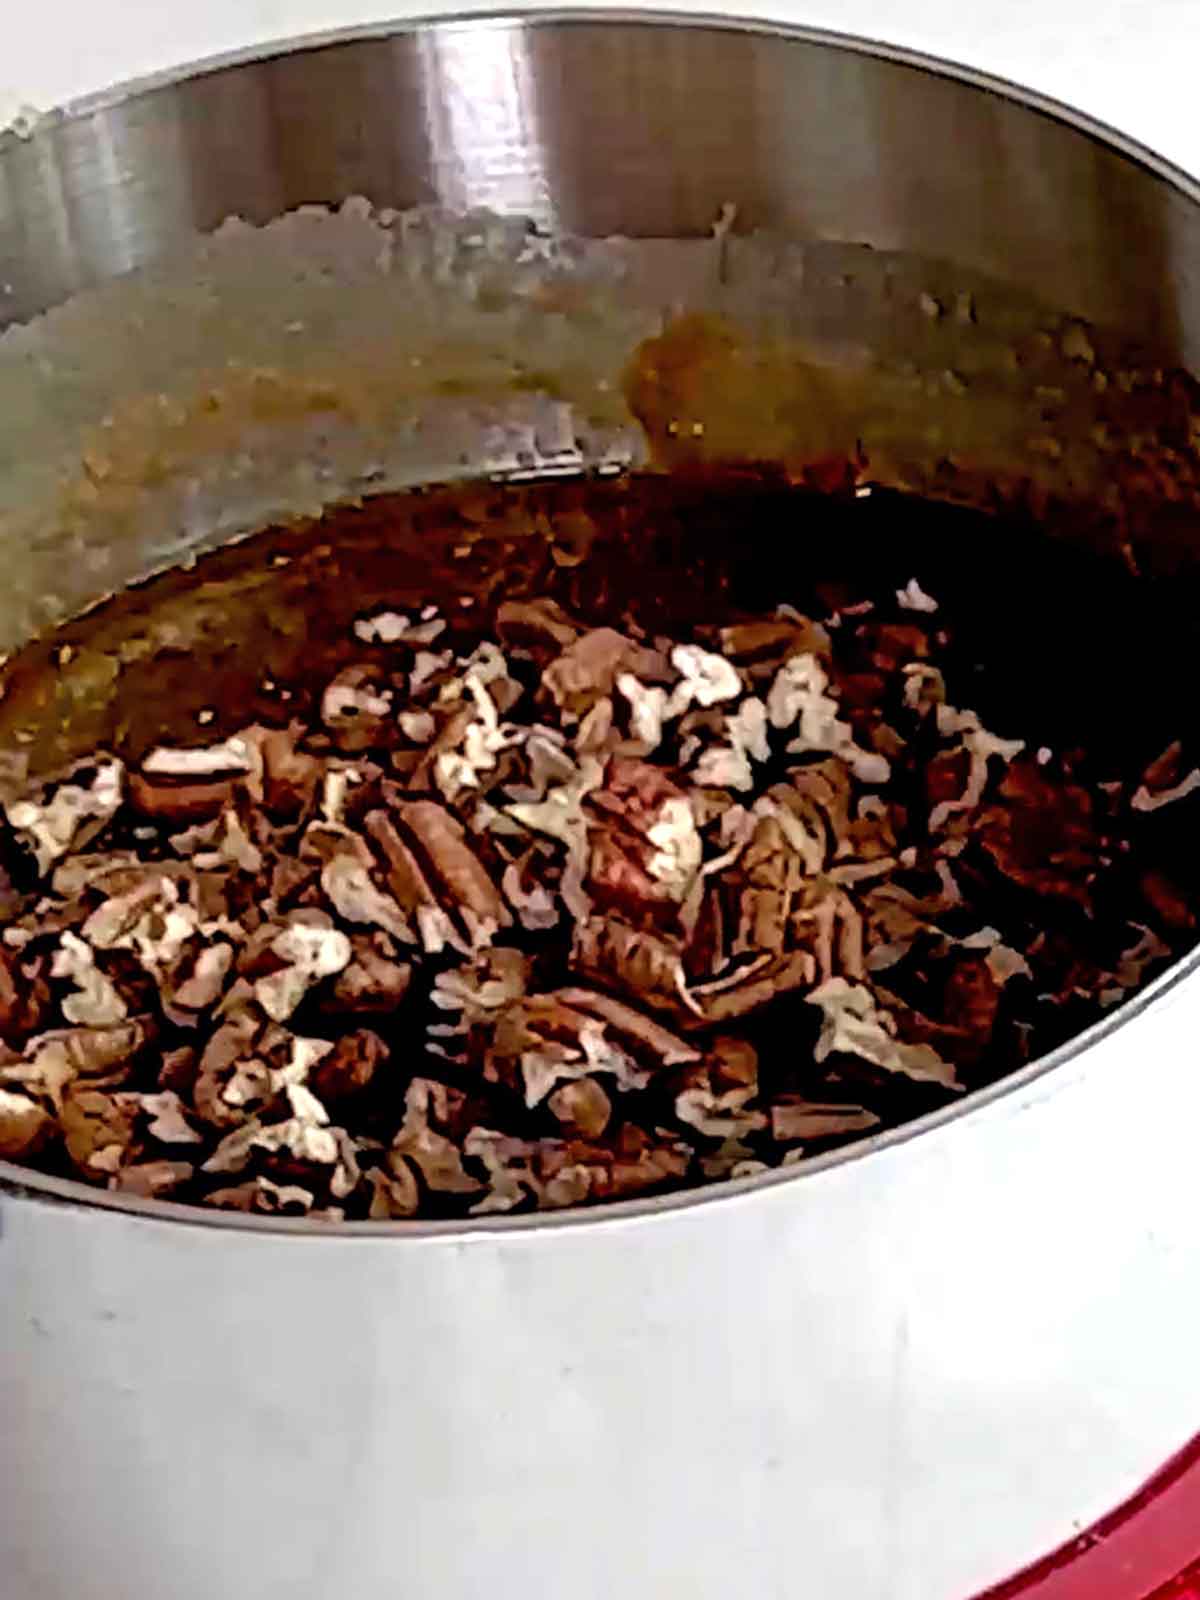 Pecans are added to the praline mixture.